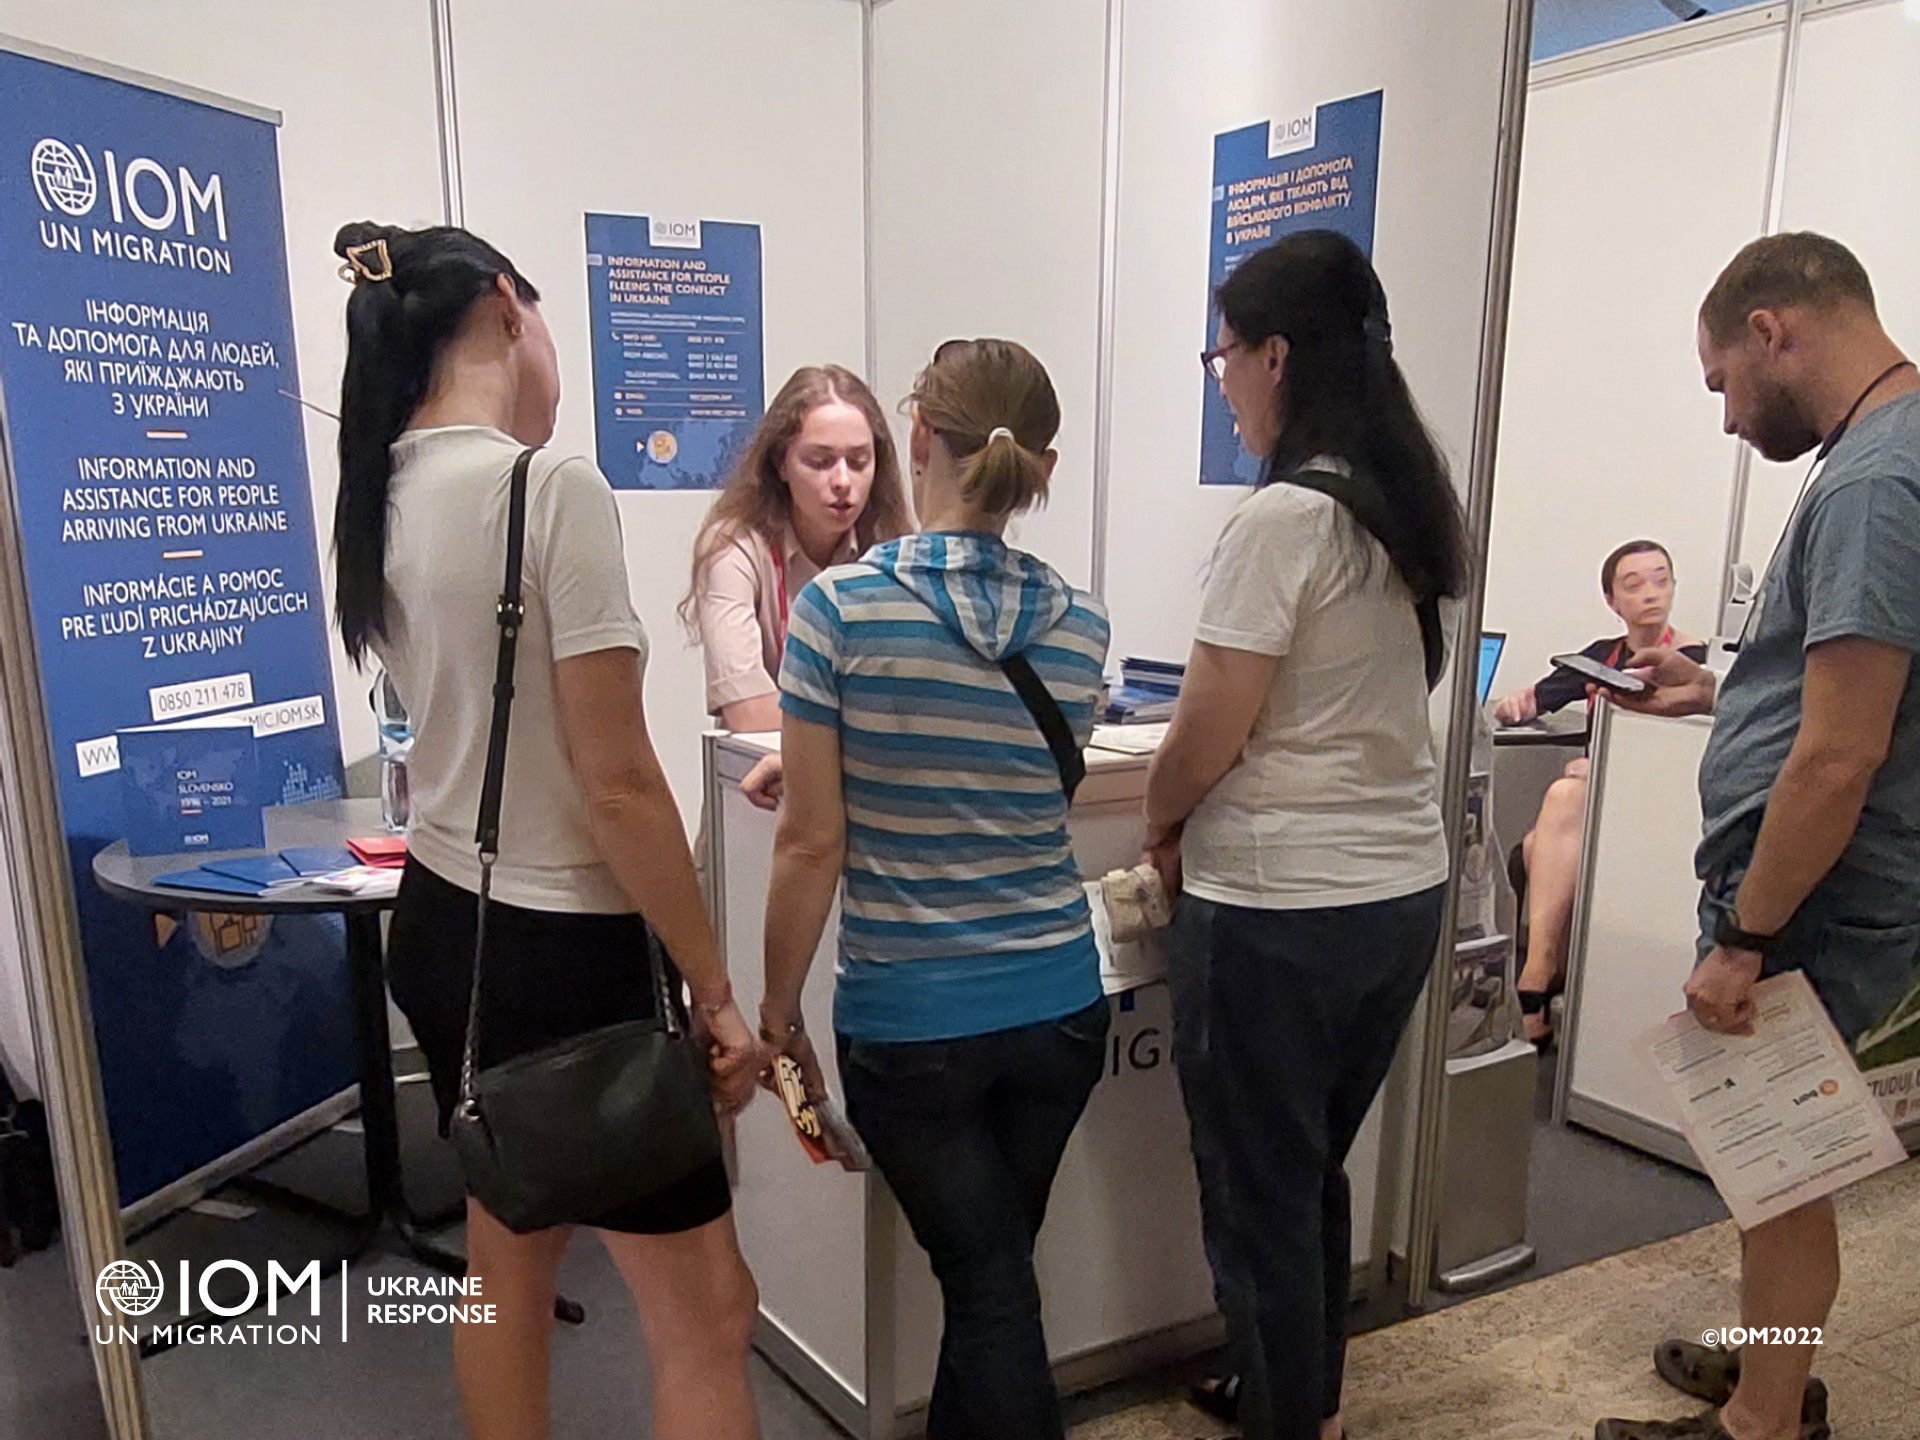 IOM Slovakia information stand at the Career Expo Kosice 2022. Photo © International Organization for Migration (IOM) 2022.